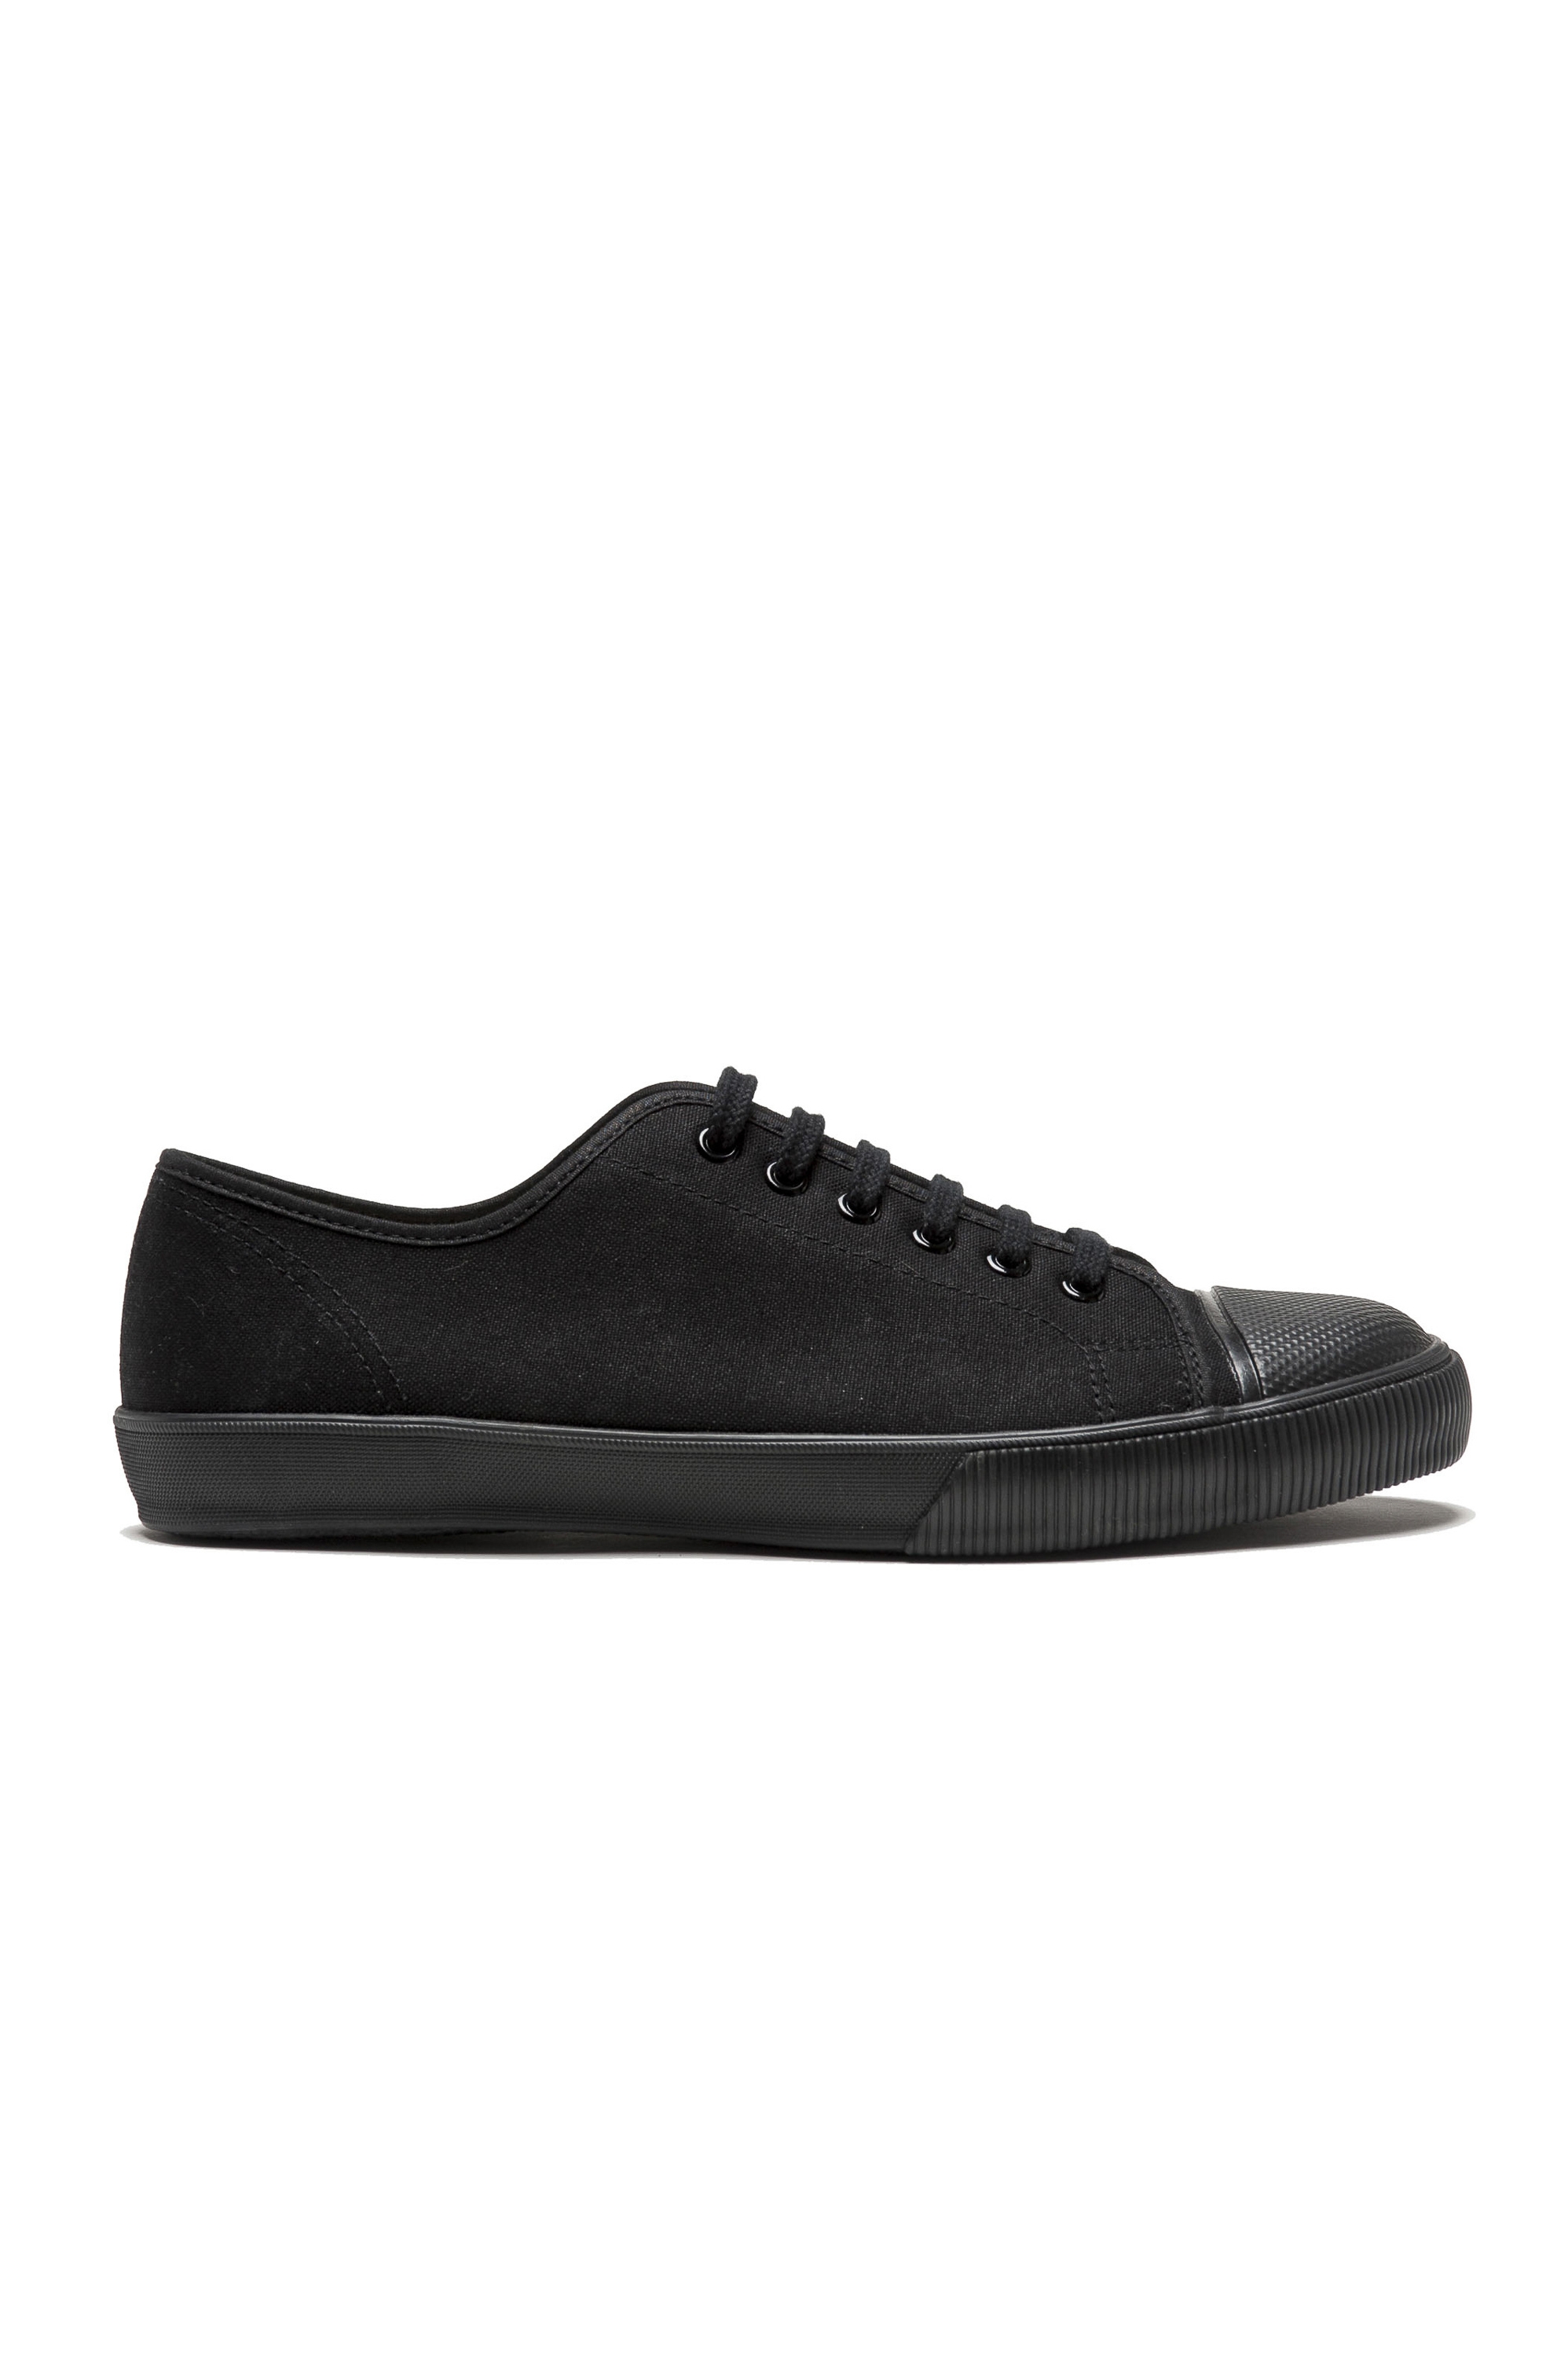 SBU 01532 Classic lace up sneakers in in black cotton canvas 01